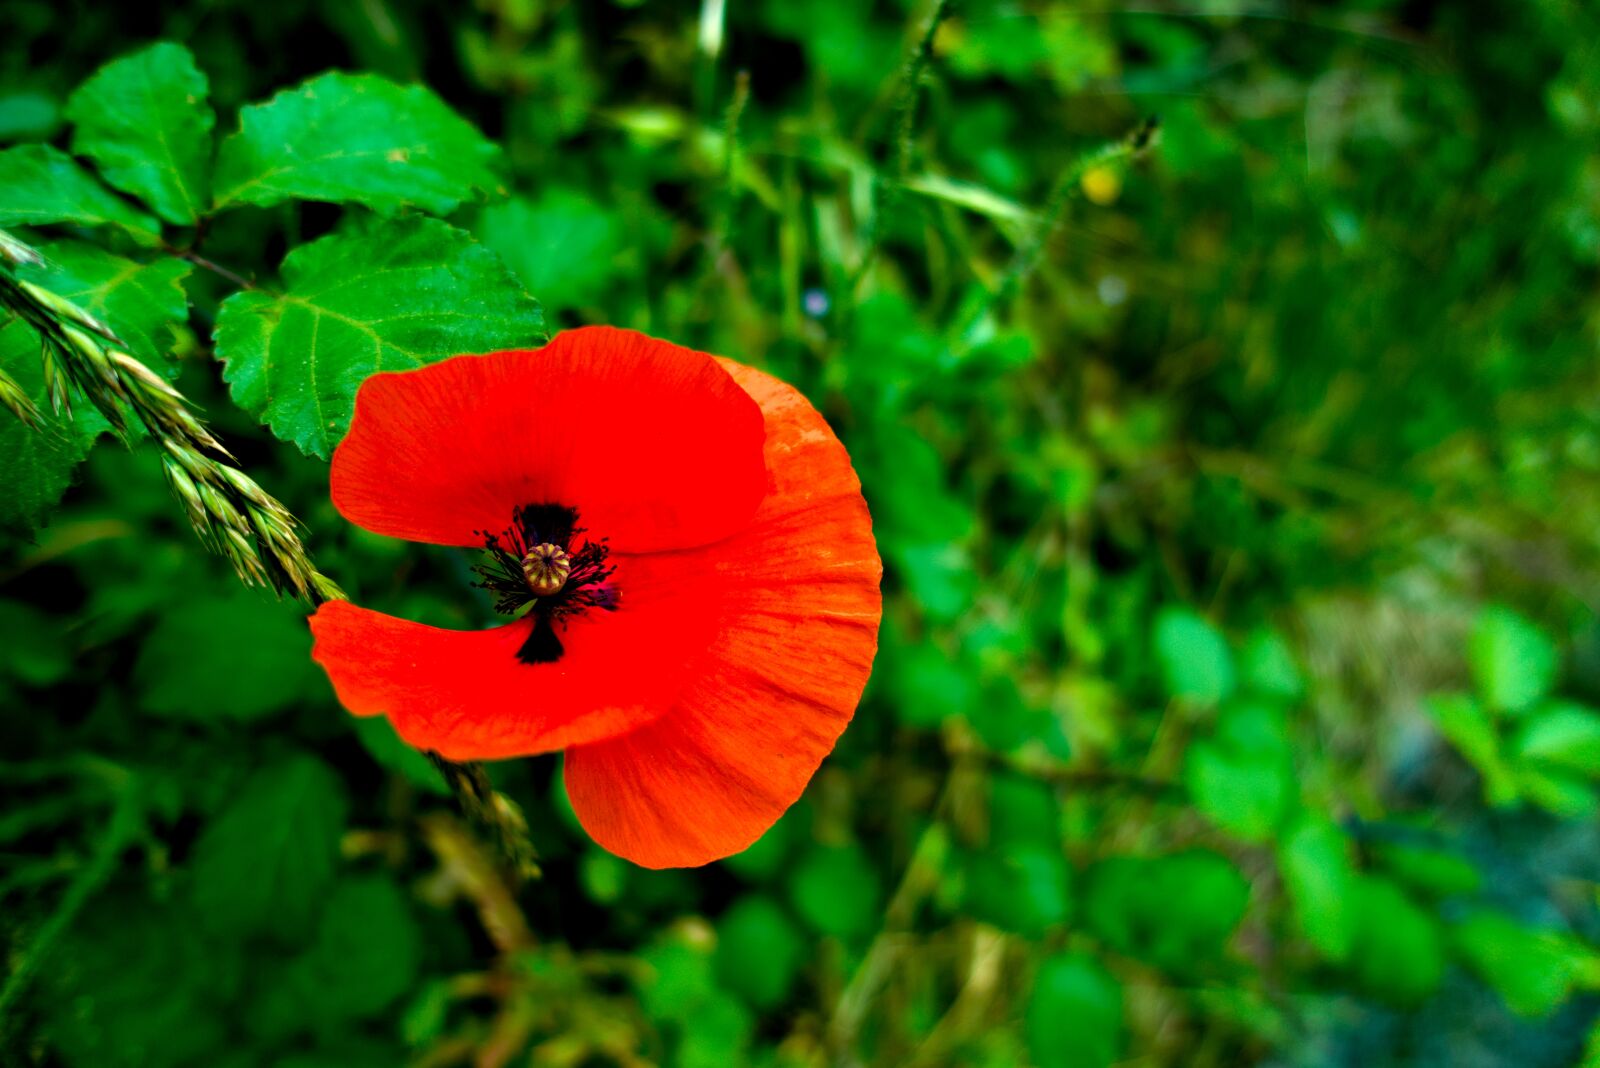 Sony DSC-RX100M5A sample photo. Poppy, red, green photography